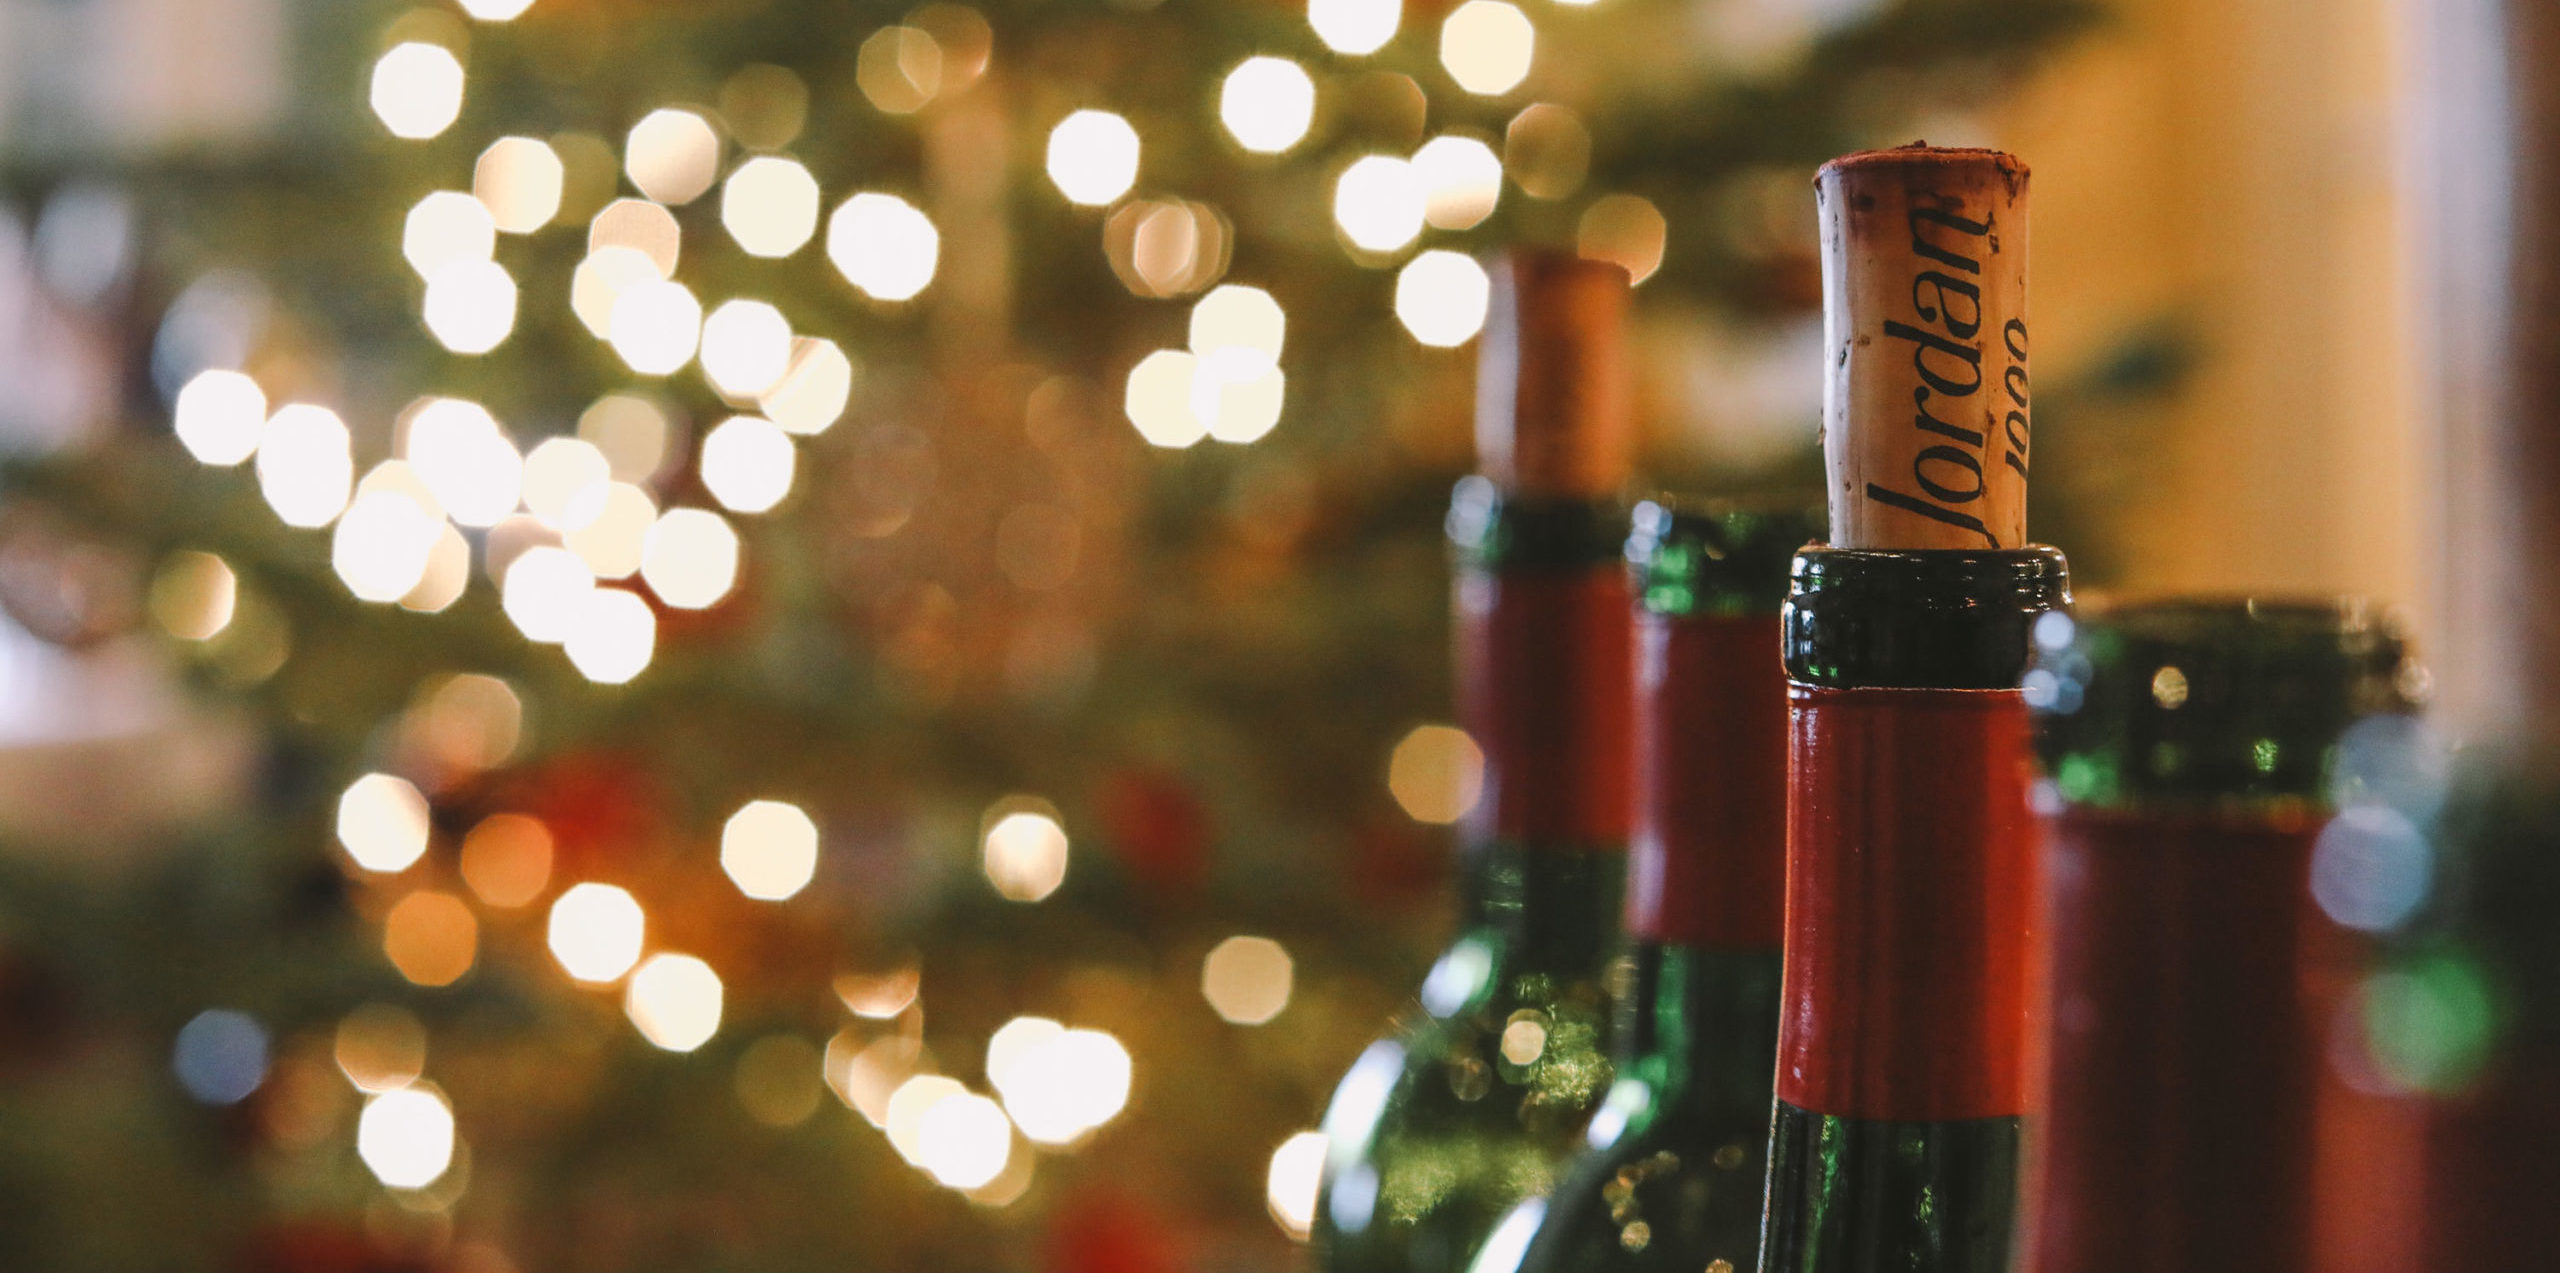 Bottles of Jordan Cabernet Sauvignon with holiday decorations in the background